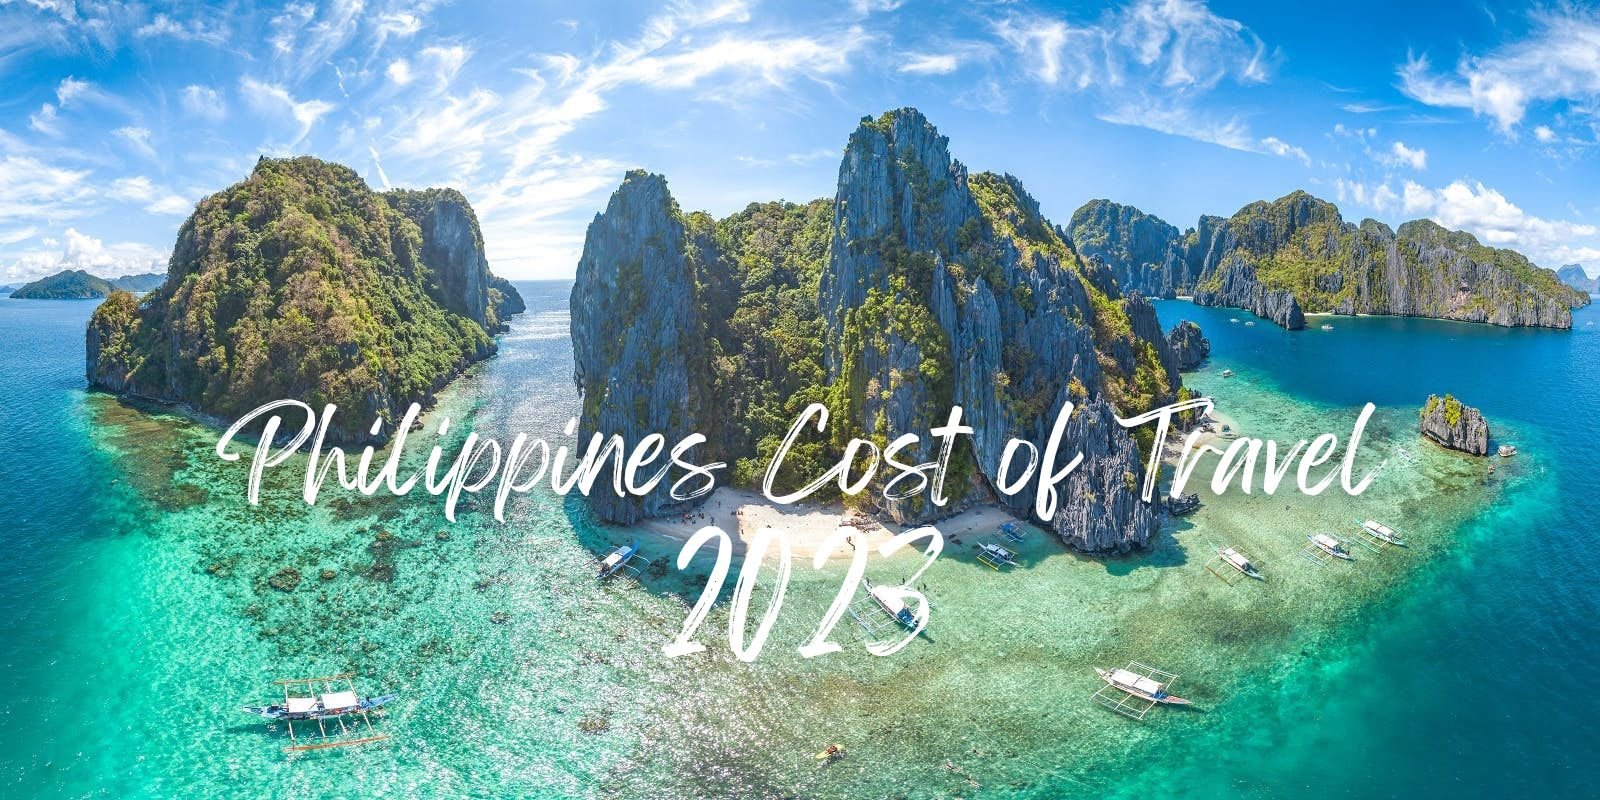 https://budgetitinerary.com/wp-content/uploads/2023/01/Philippines-Cost-of-Travel-in-2023.jpg